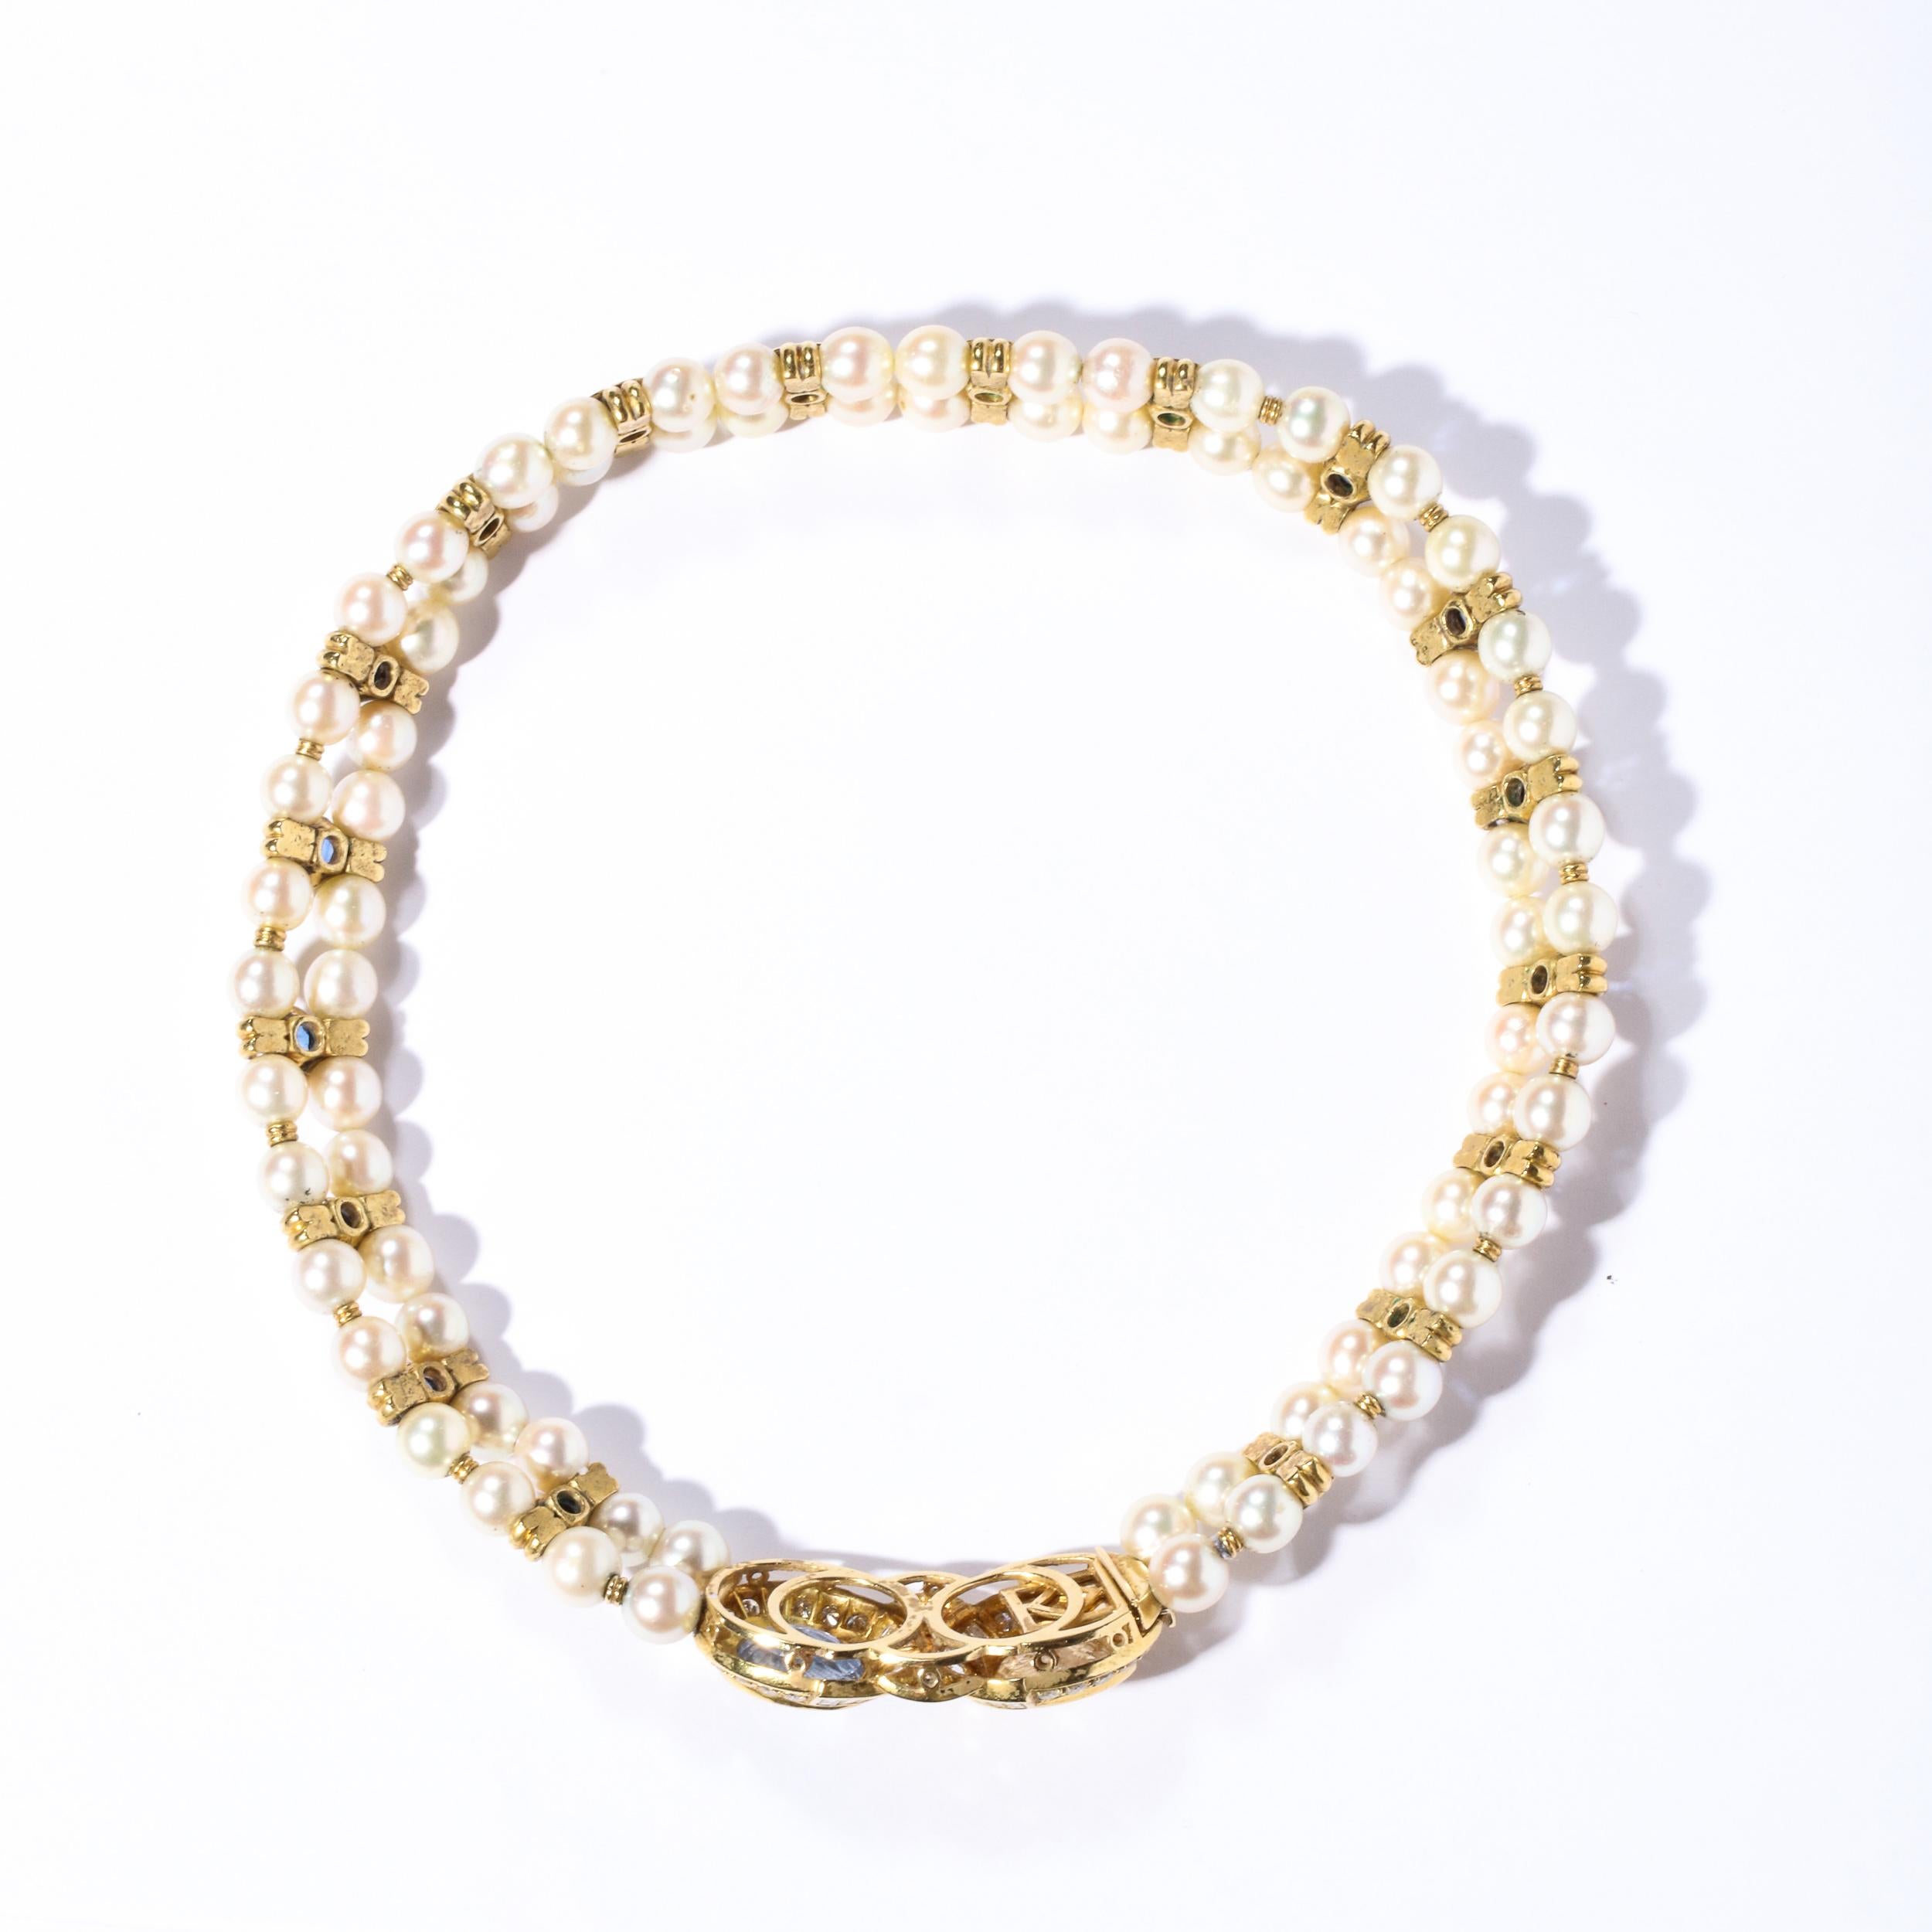 Double Strand Pearl Necklace  with Carved Citrine & Iolite, 18k and Diamonds  im Angebot 4